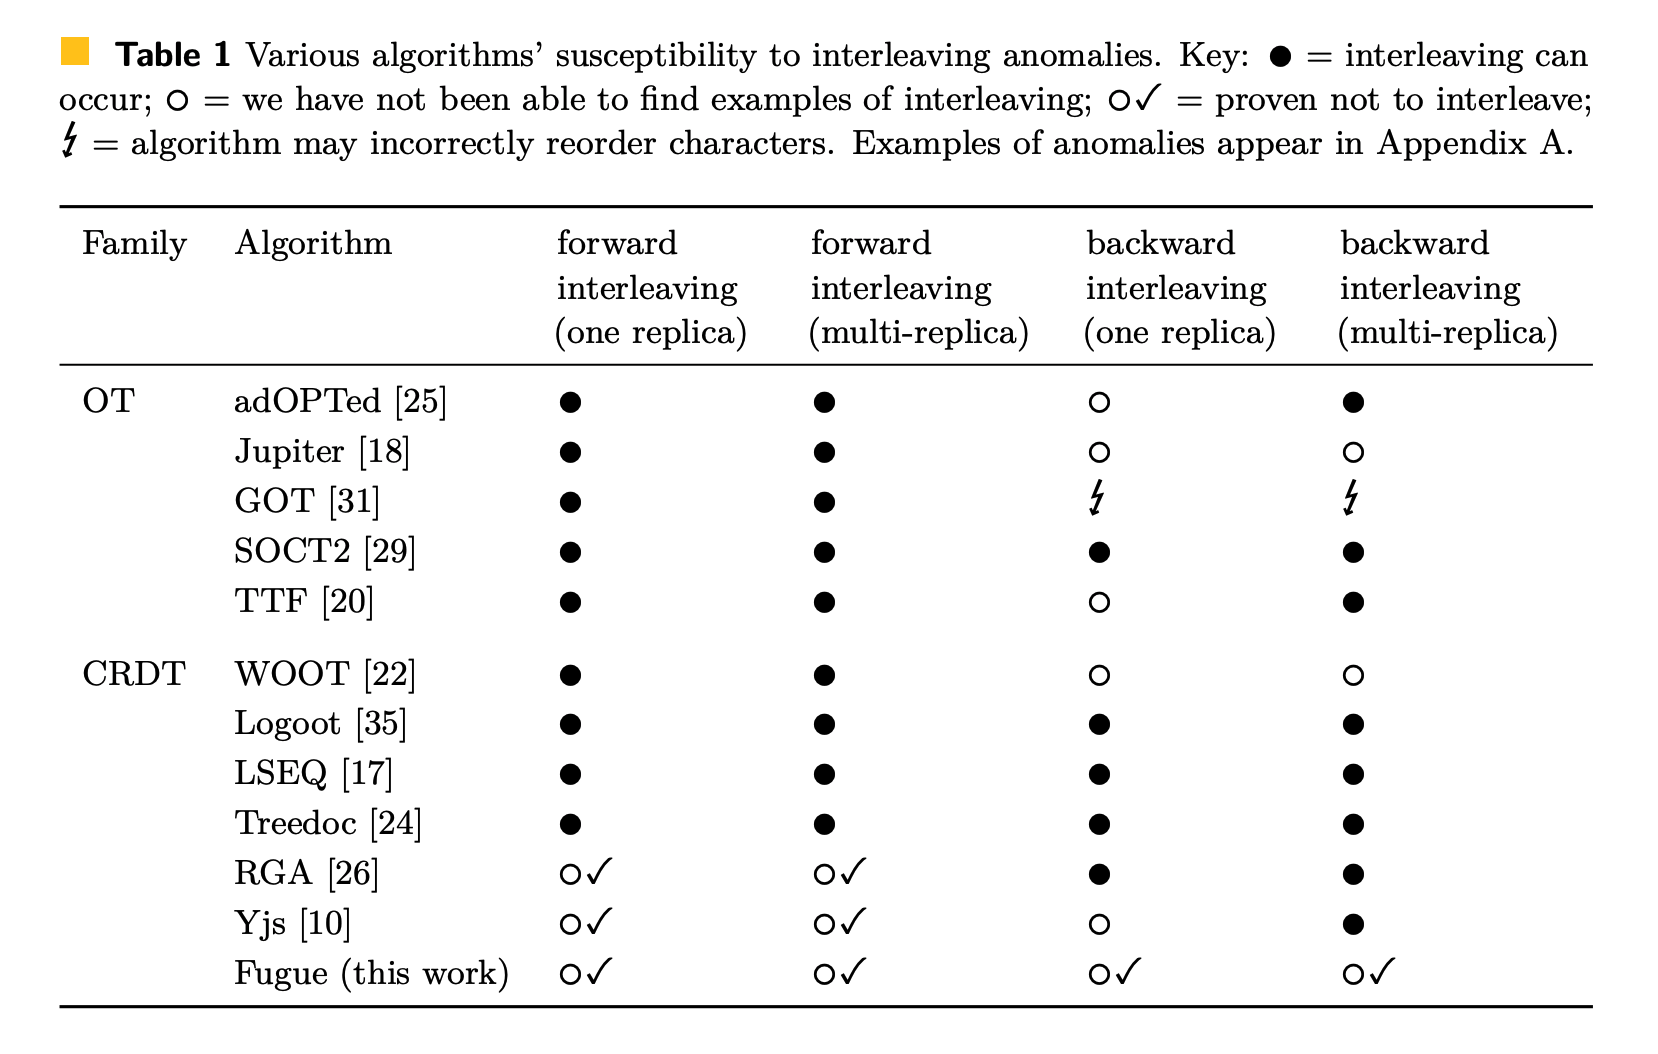 Souece: Weidner, M., Gentle, J., & Kleppmann, M. (2023). The Art of the Fugue: Minimizing Interleaving in Collaborative Text Editing. ArXiv. /abs/2305.00583